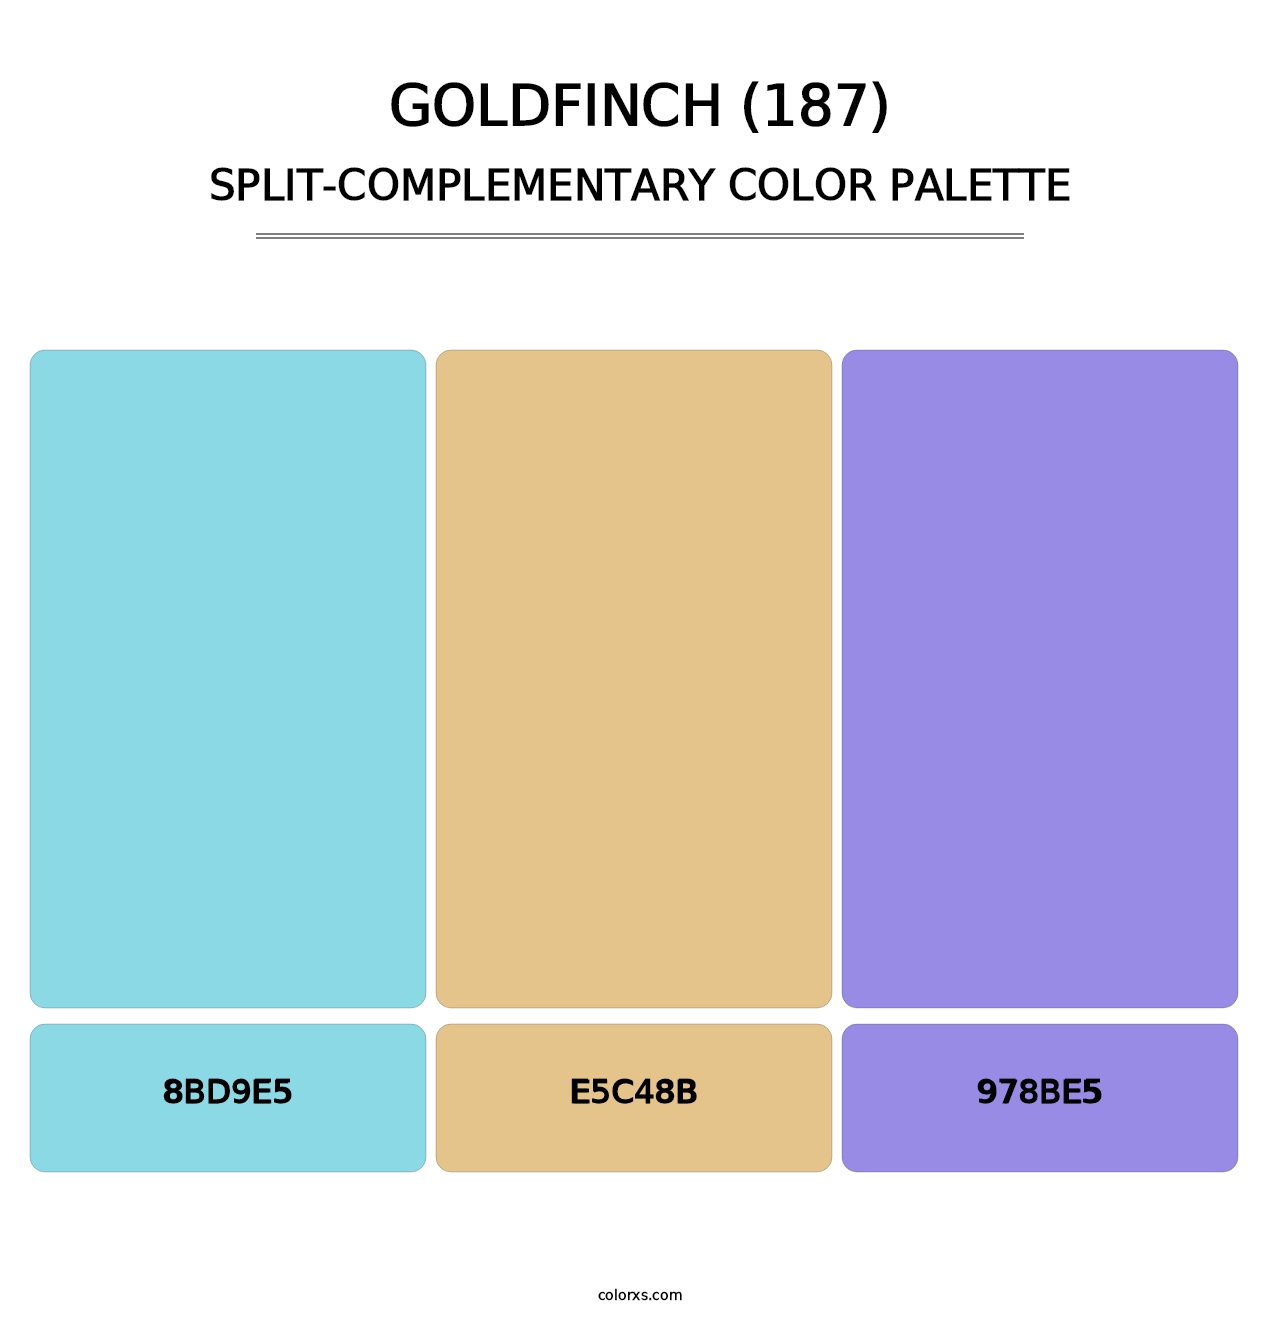 Goldfinch (187) - Split-Complementary Color Palette